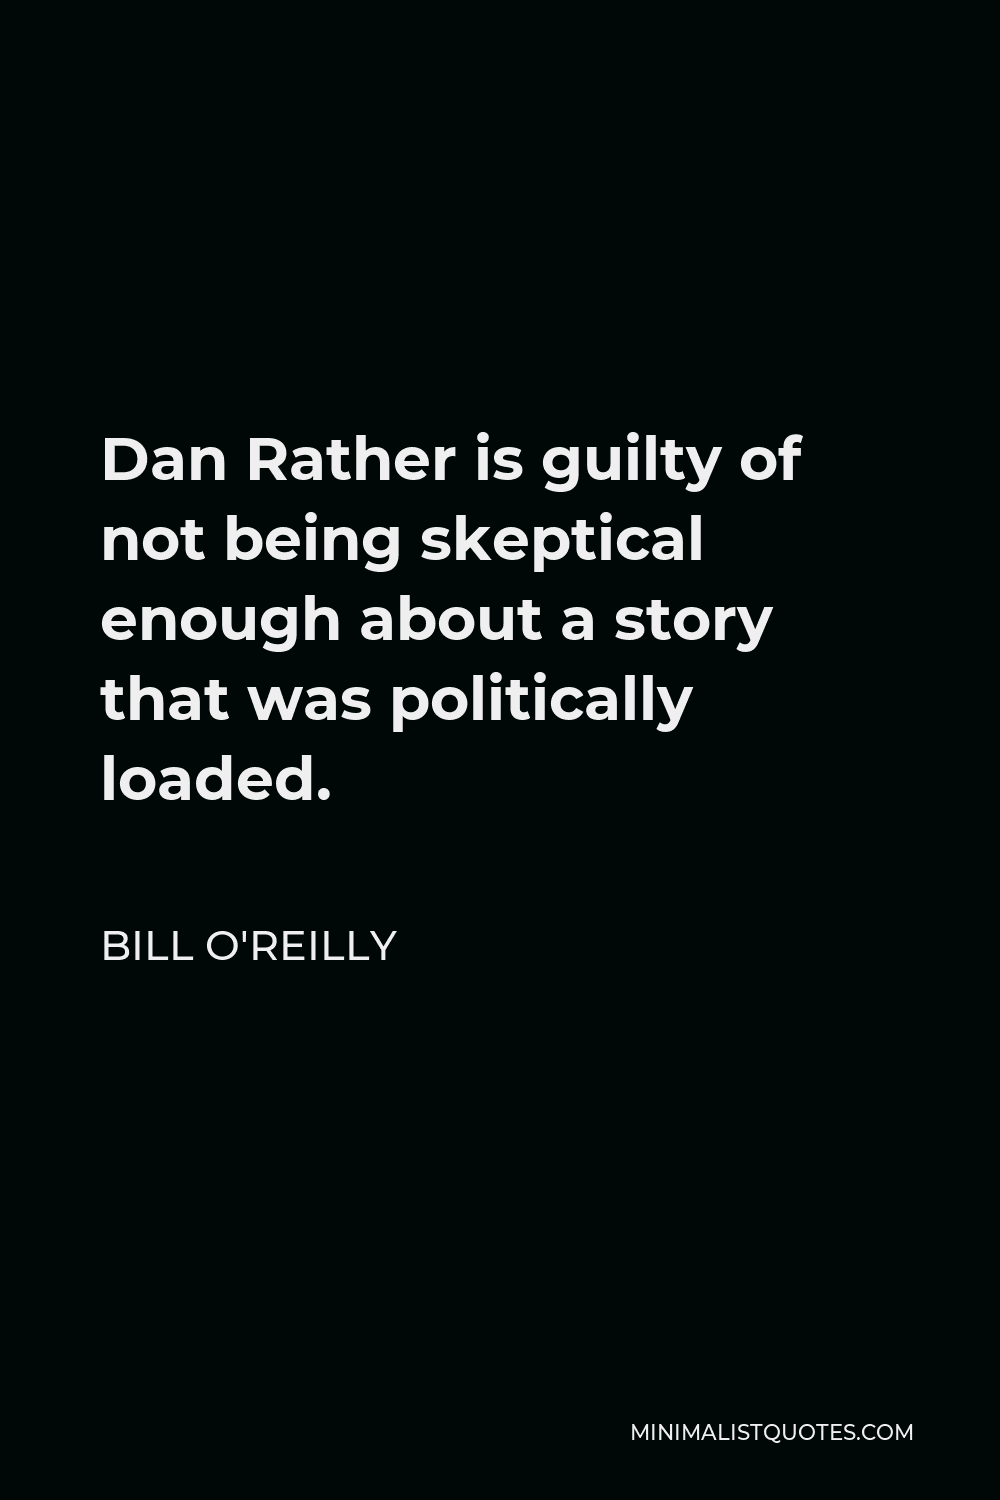 Bill O'Reilly Quote - Dan Rather is guilty of not being skeptical enough about a story that was politically loaded.